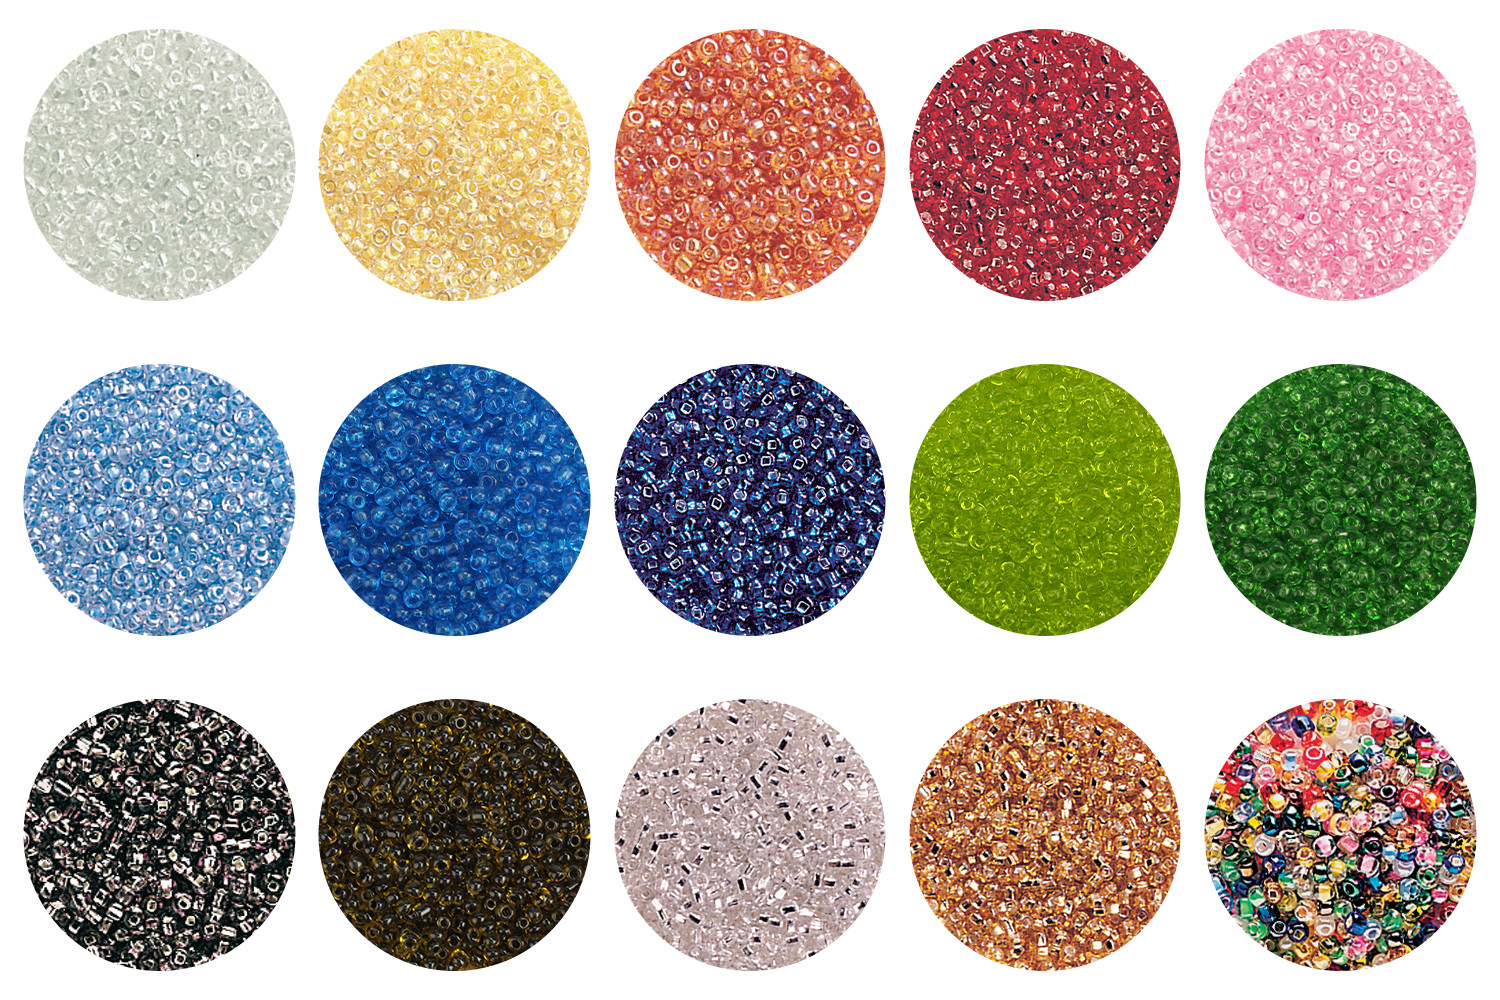 Seed beads: A small wonder for jewelry making